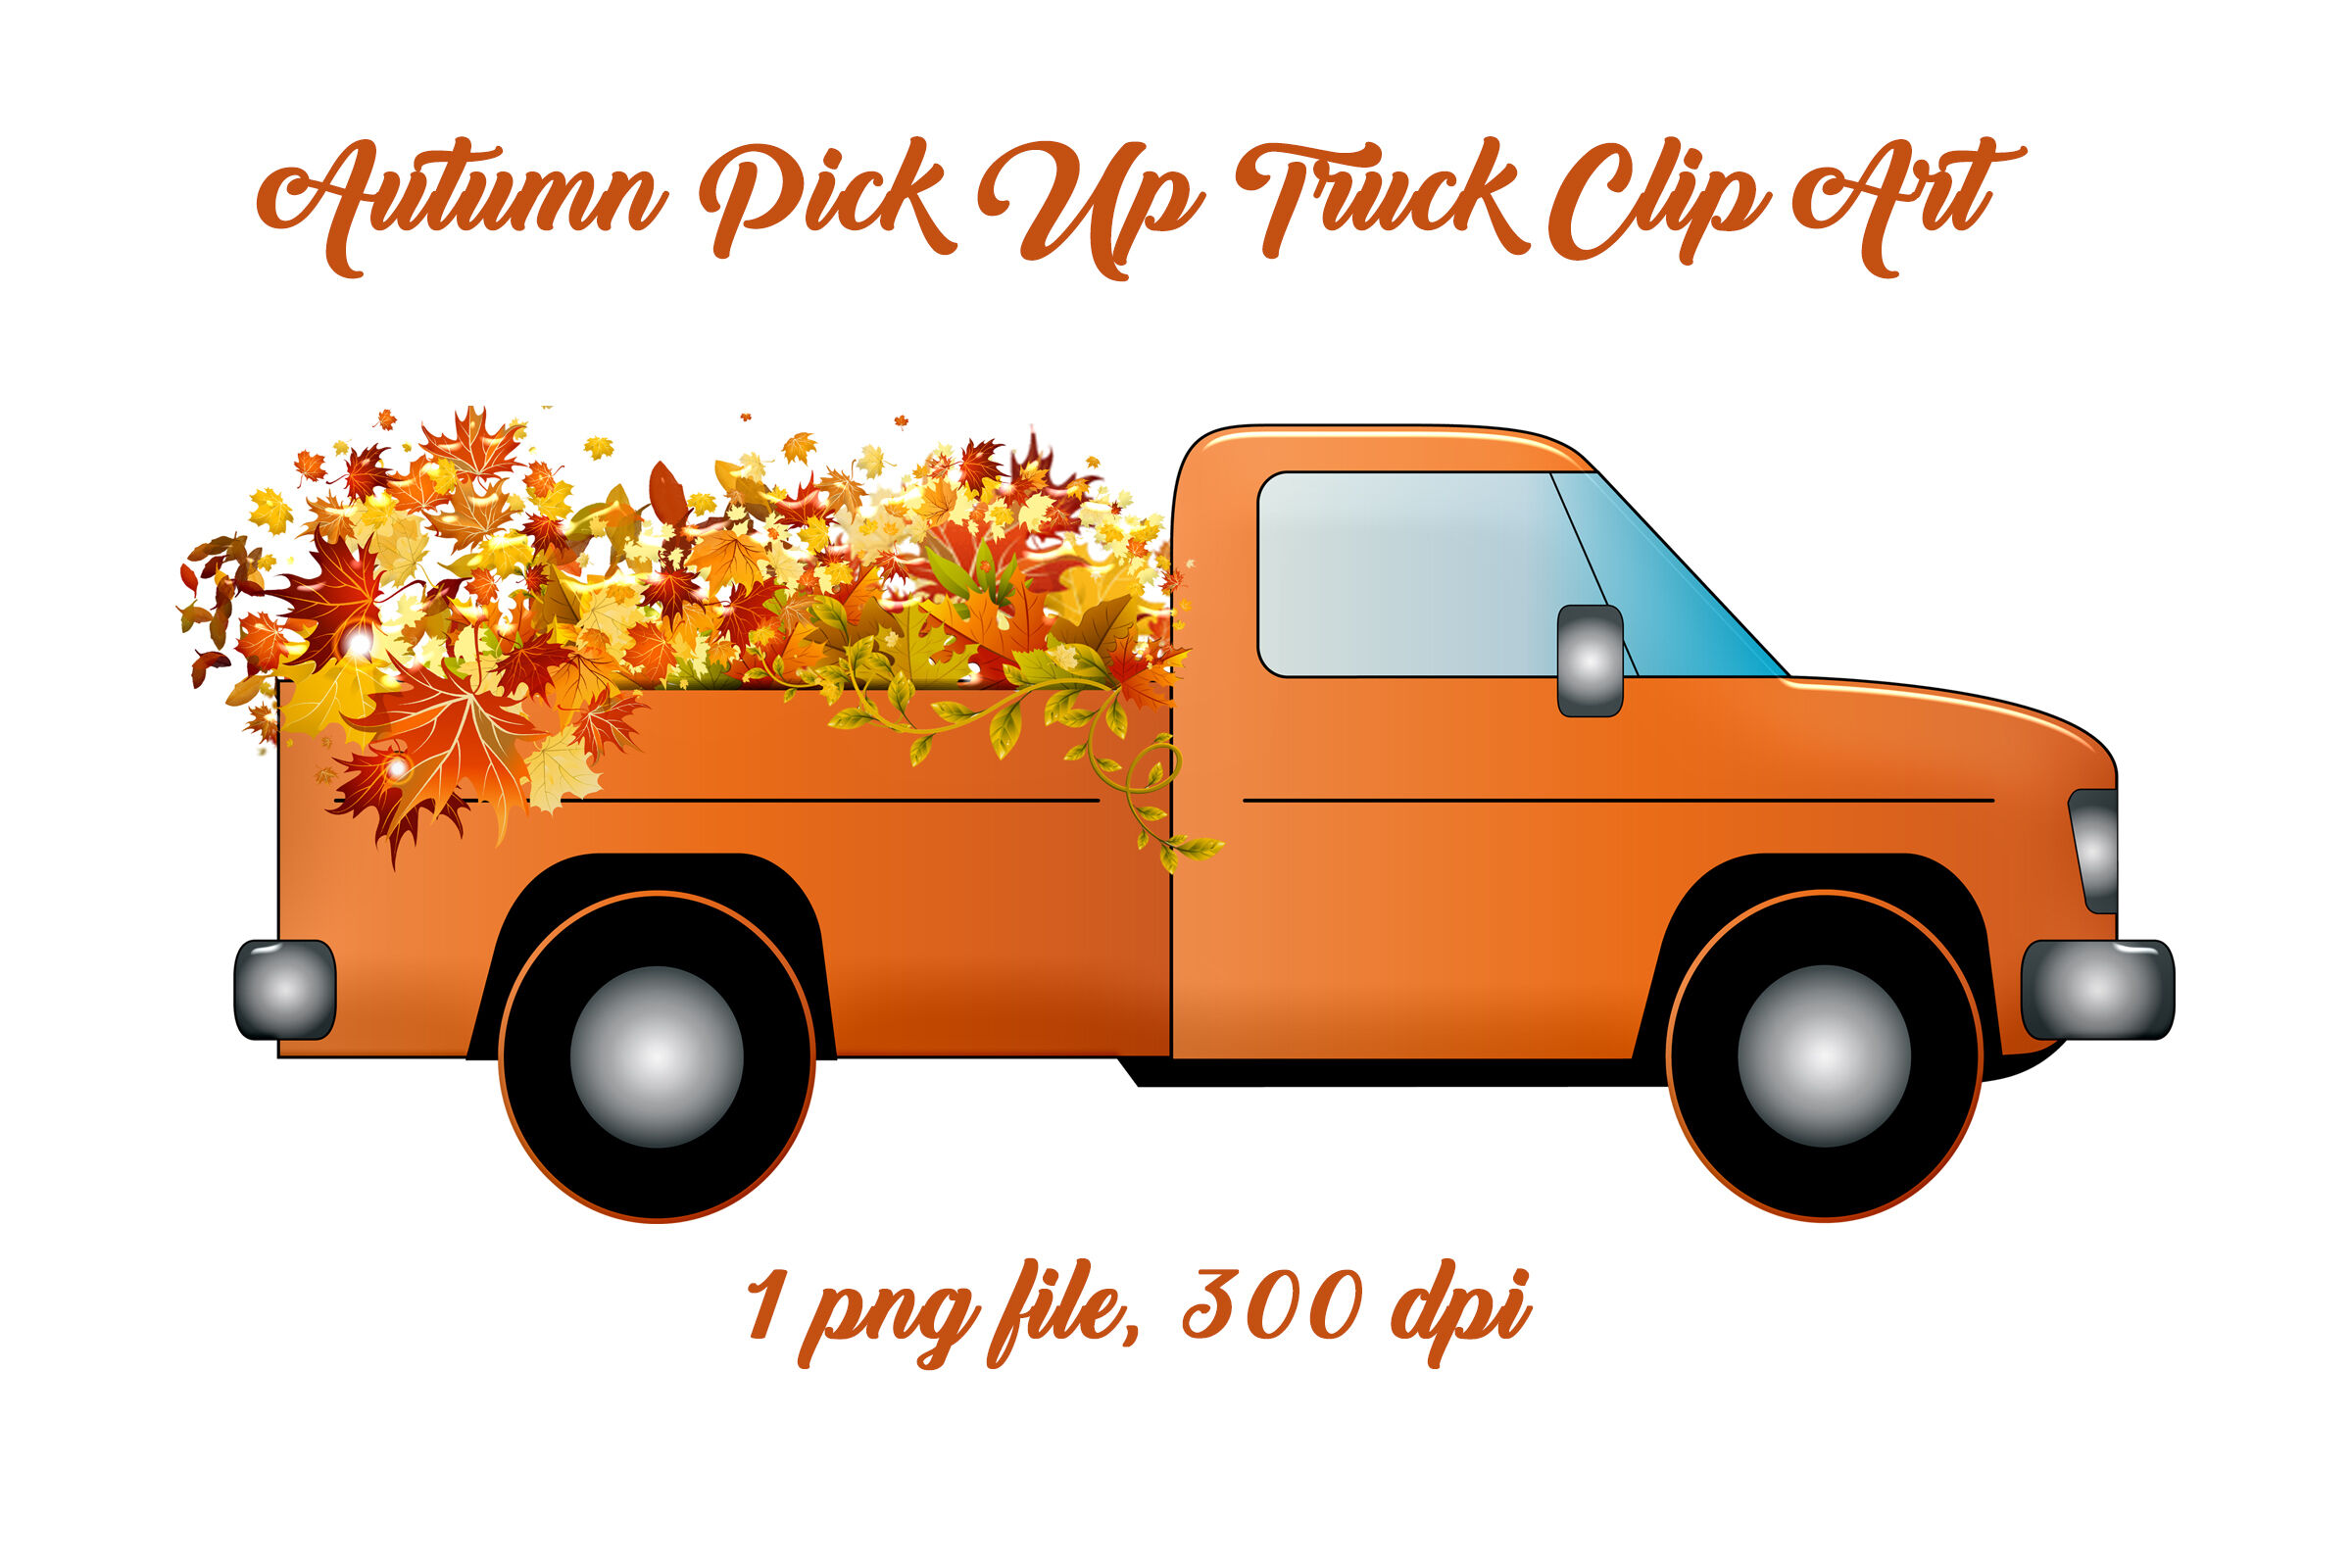 truck-carrying-autumn-leaves-stationery-party-supplies-nordicid